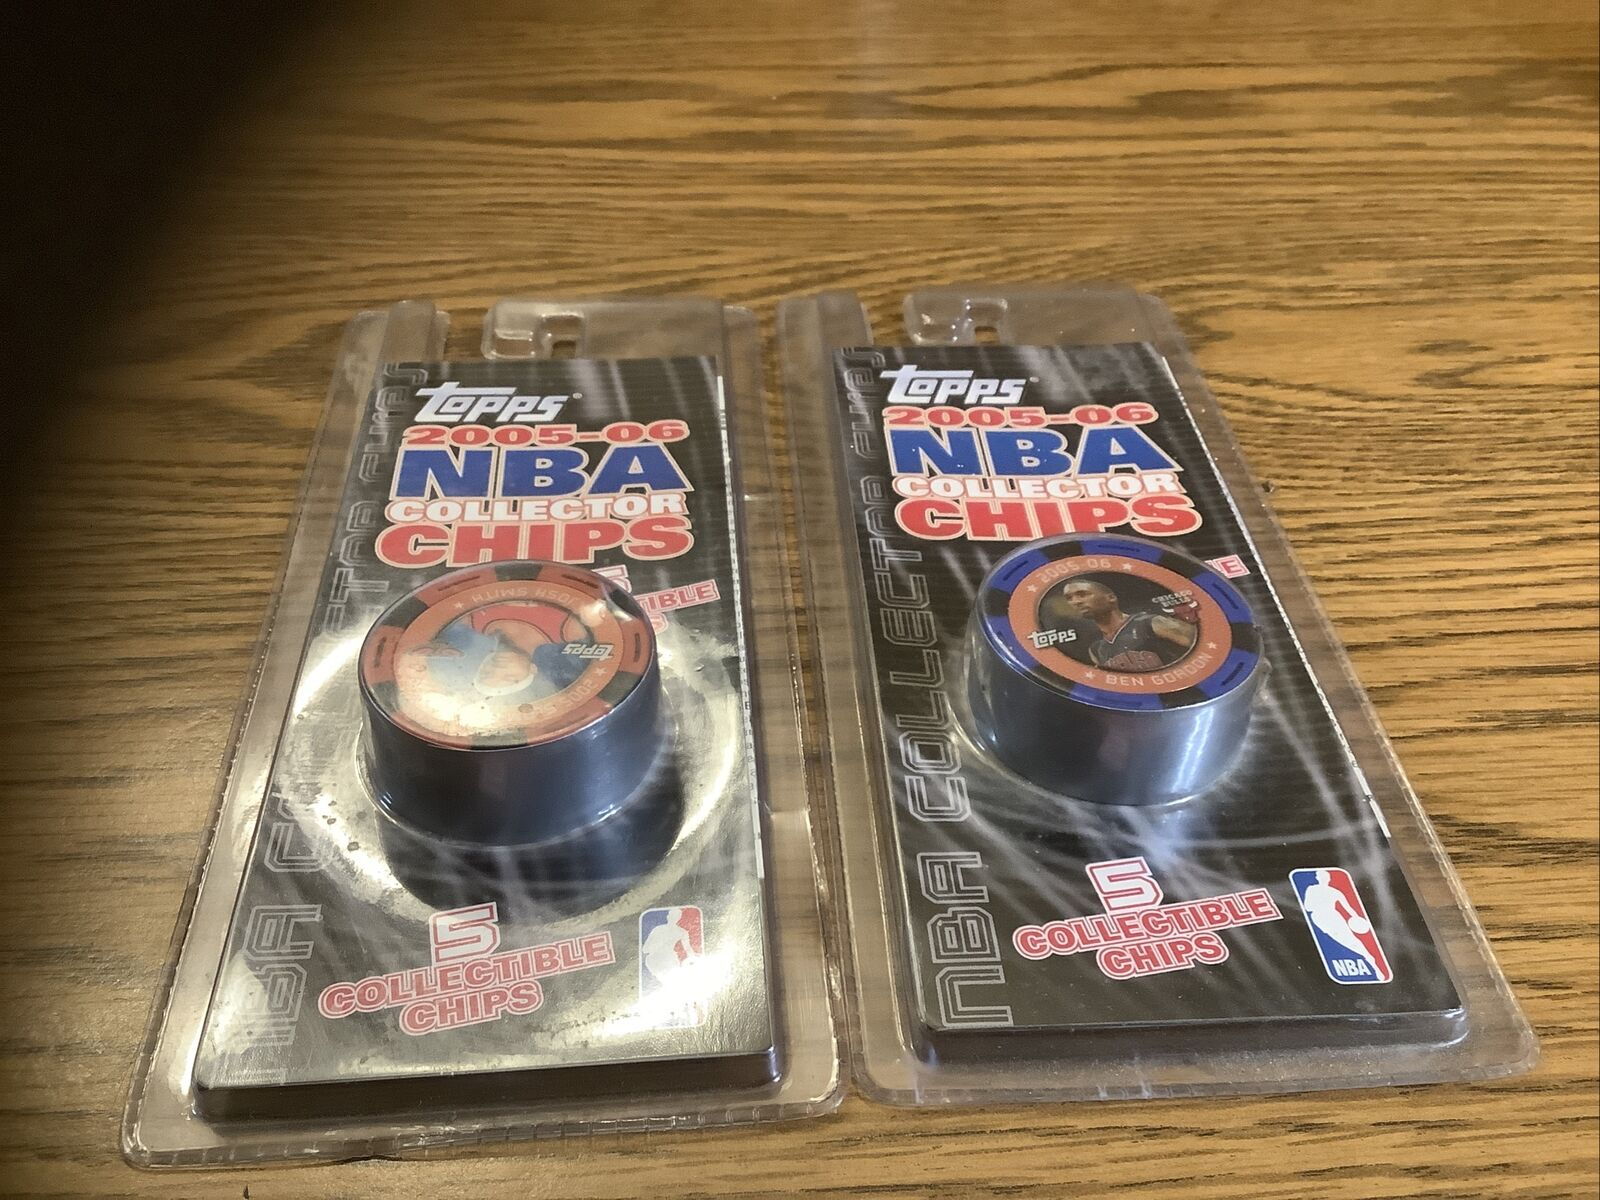 Basketball Topps 2005-06 Collector Chips Pack